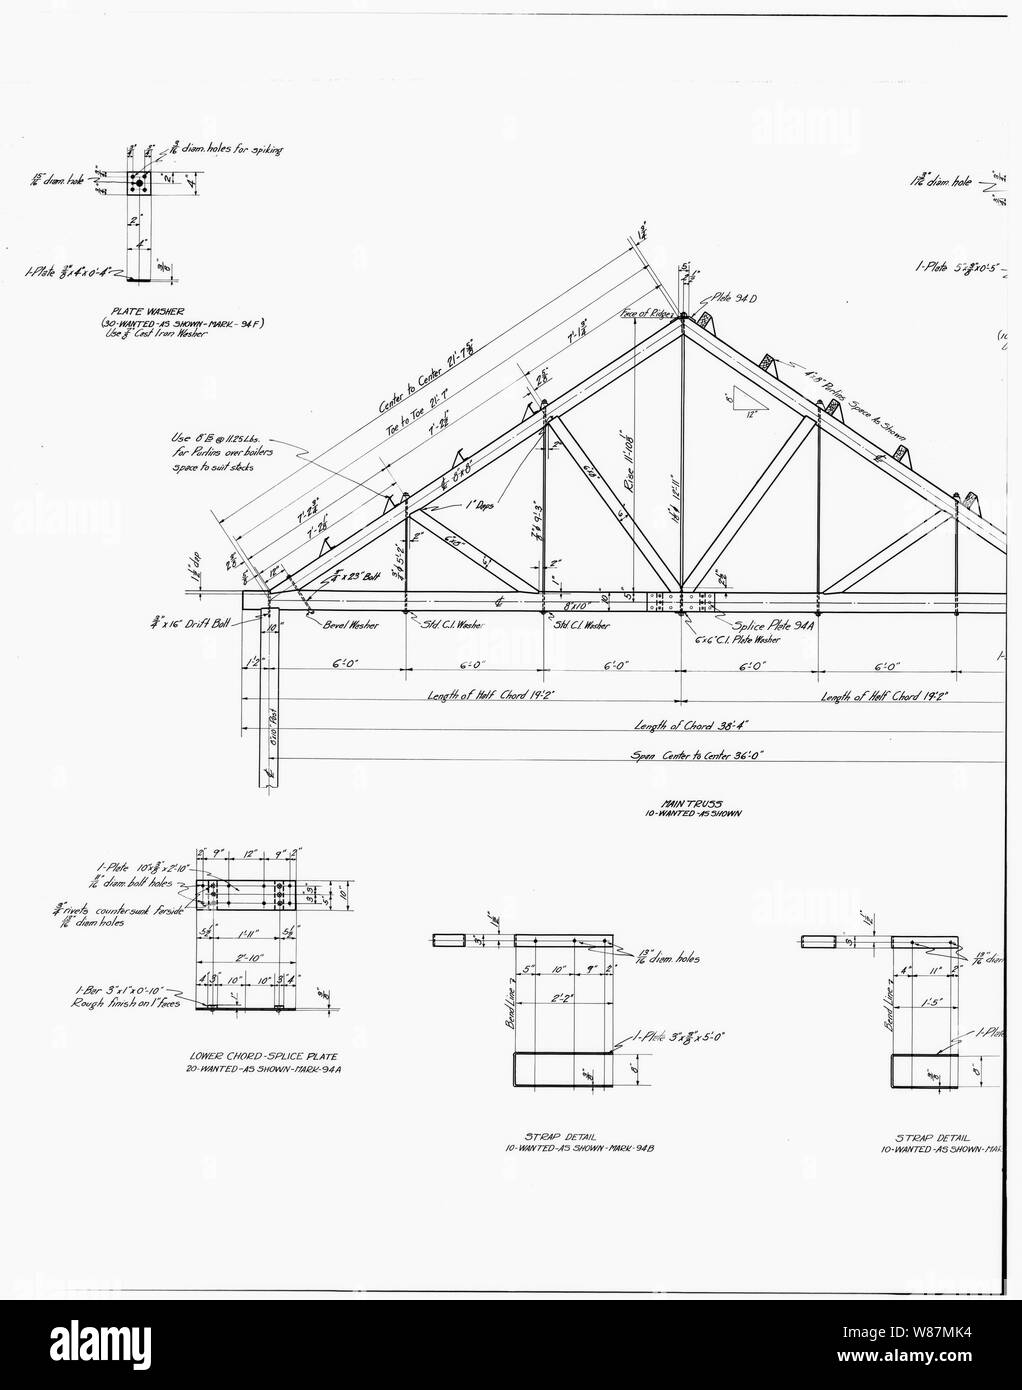 How to draw a fabrication weld drawing of a truss  Quora